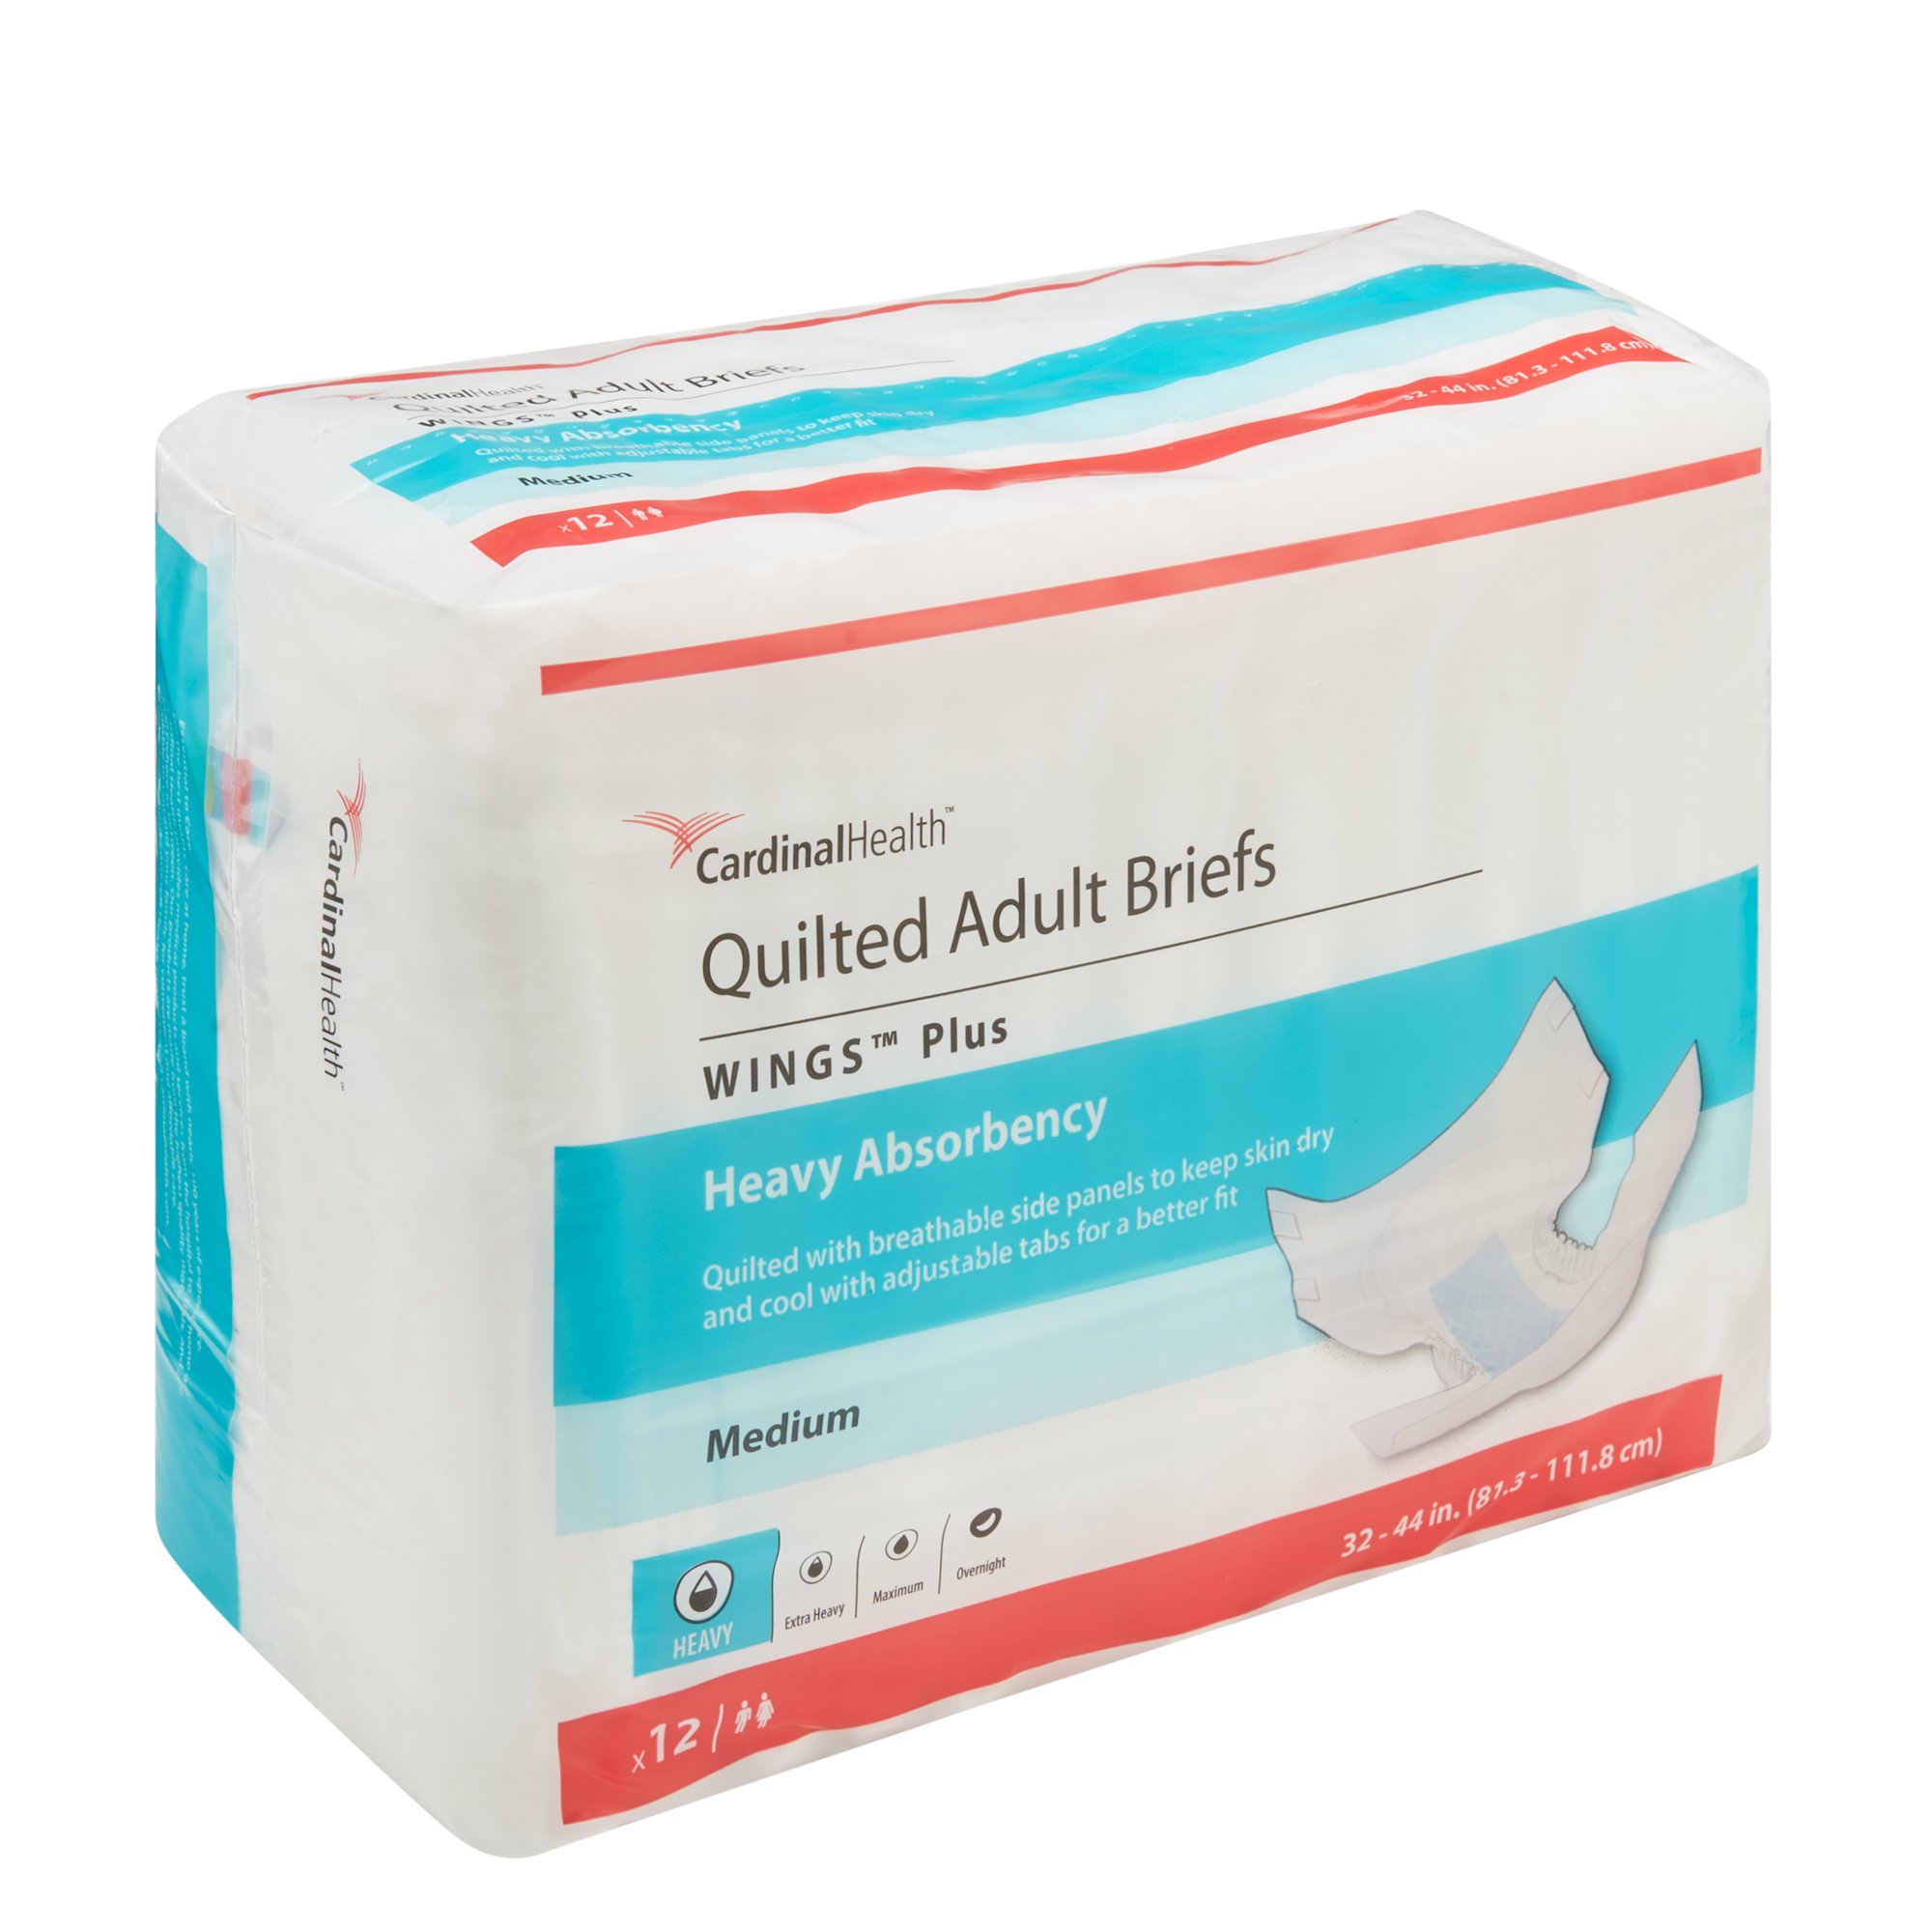 Wings™ Plus Quilted Heavy Absorbency Incontinence Brief, Medium